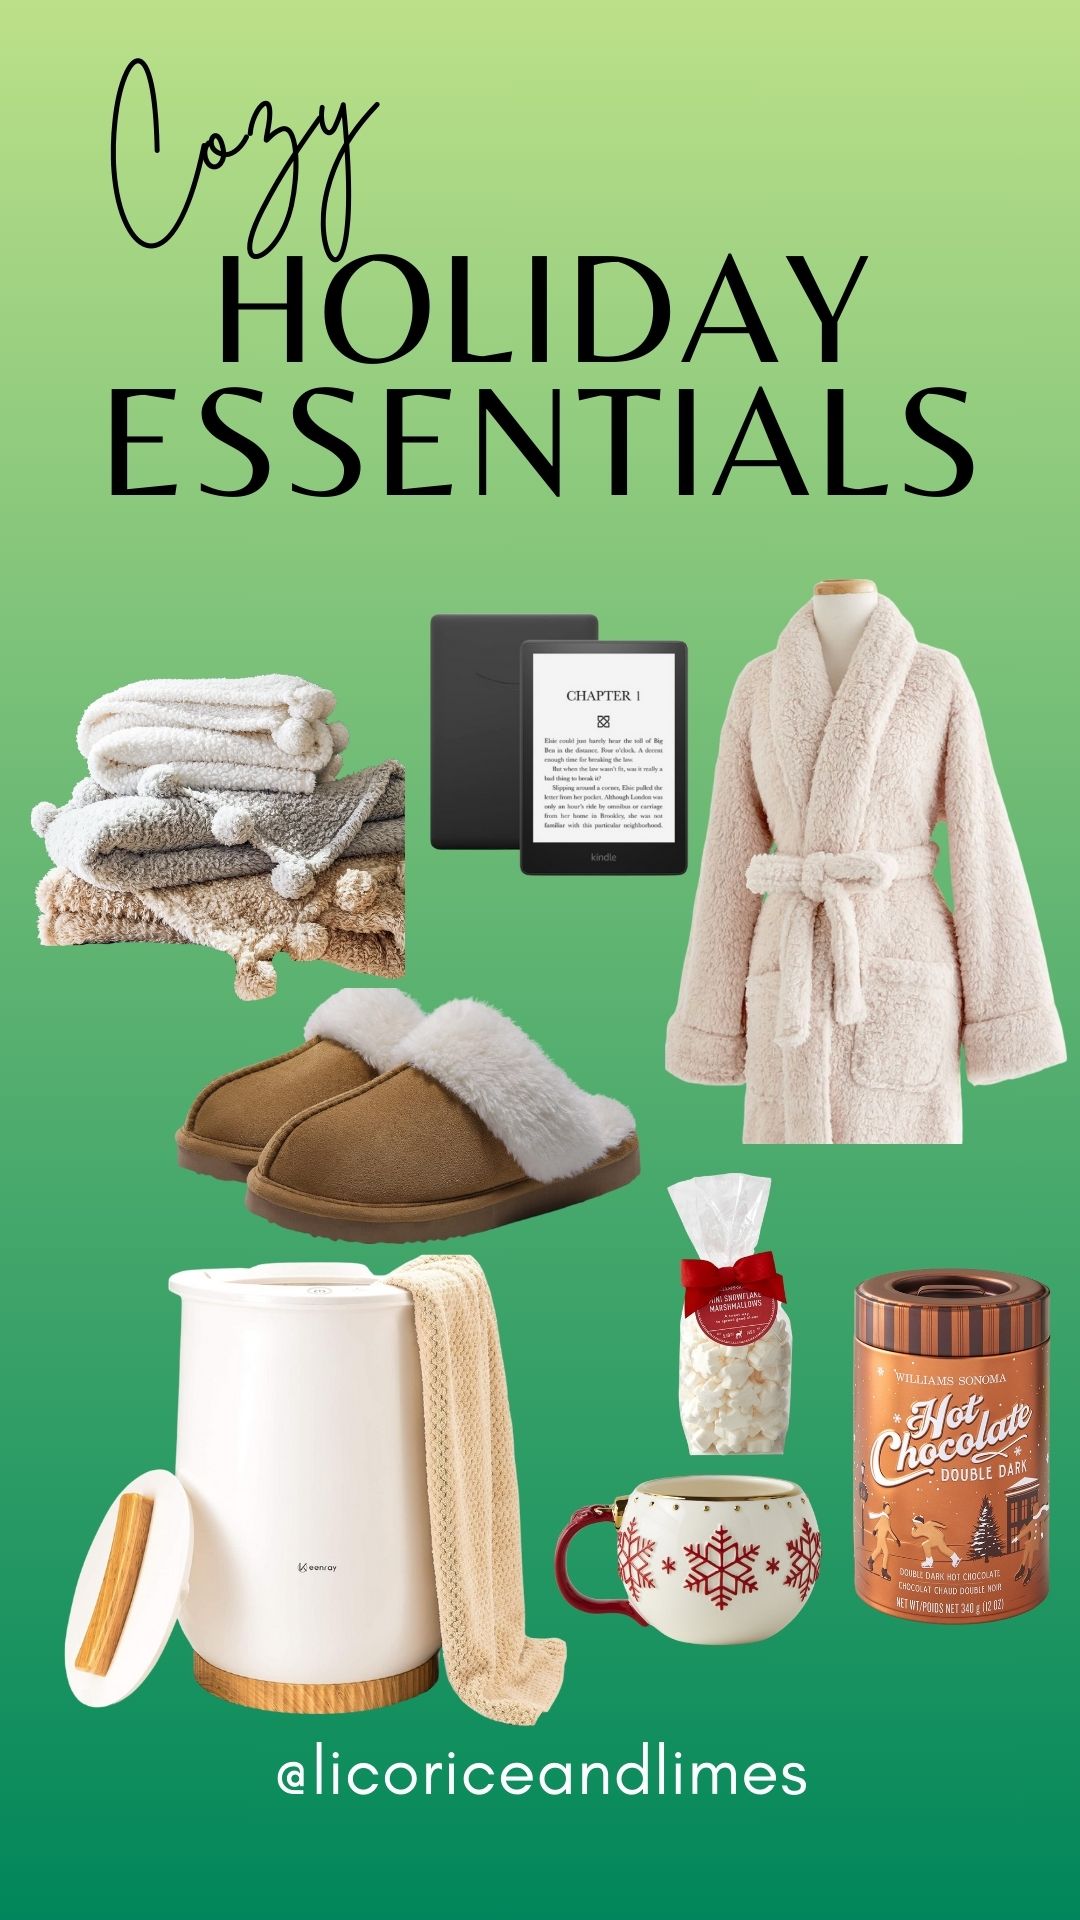 Perfect List of Cozy Holiday Essentials